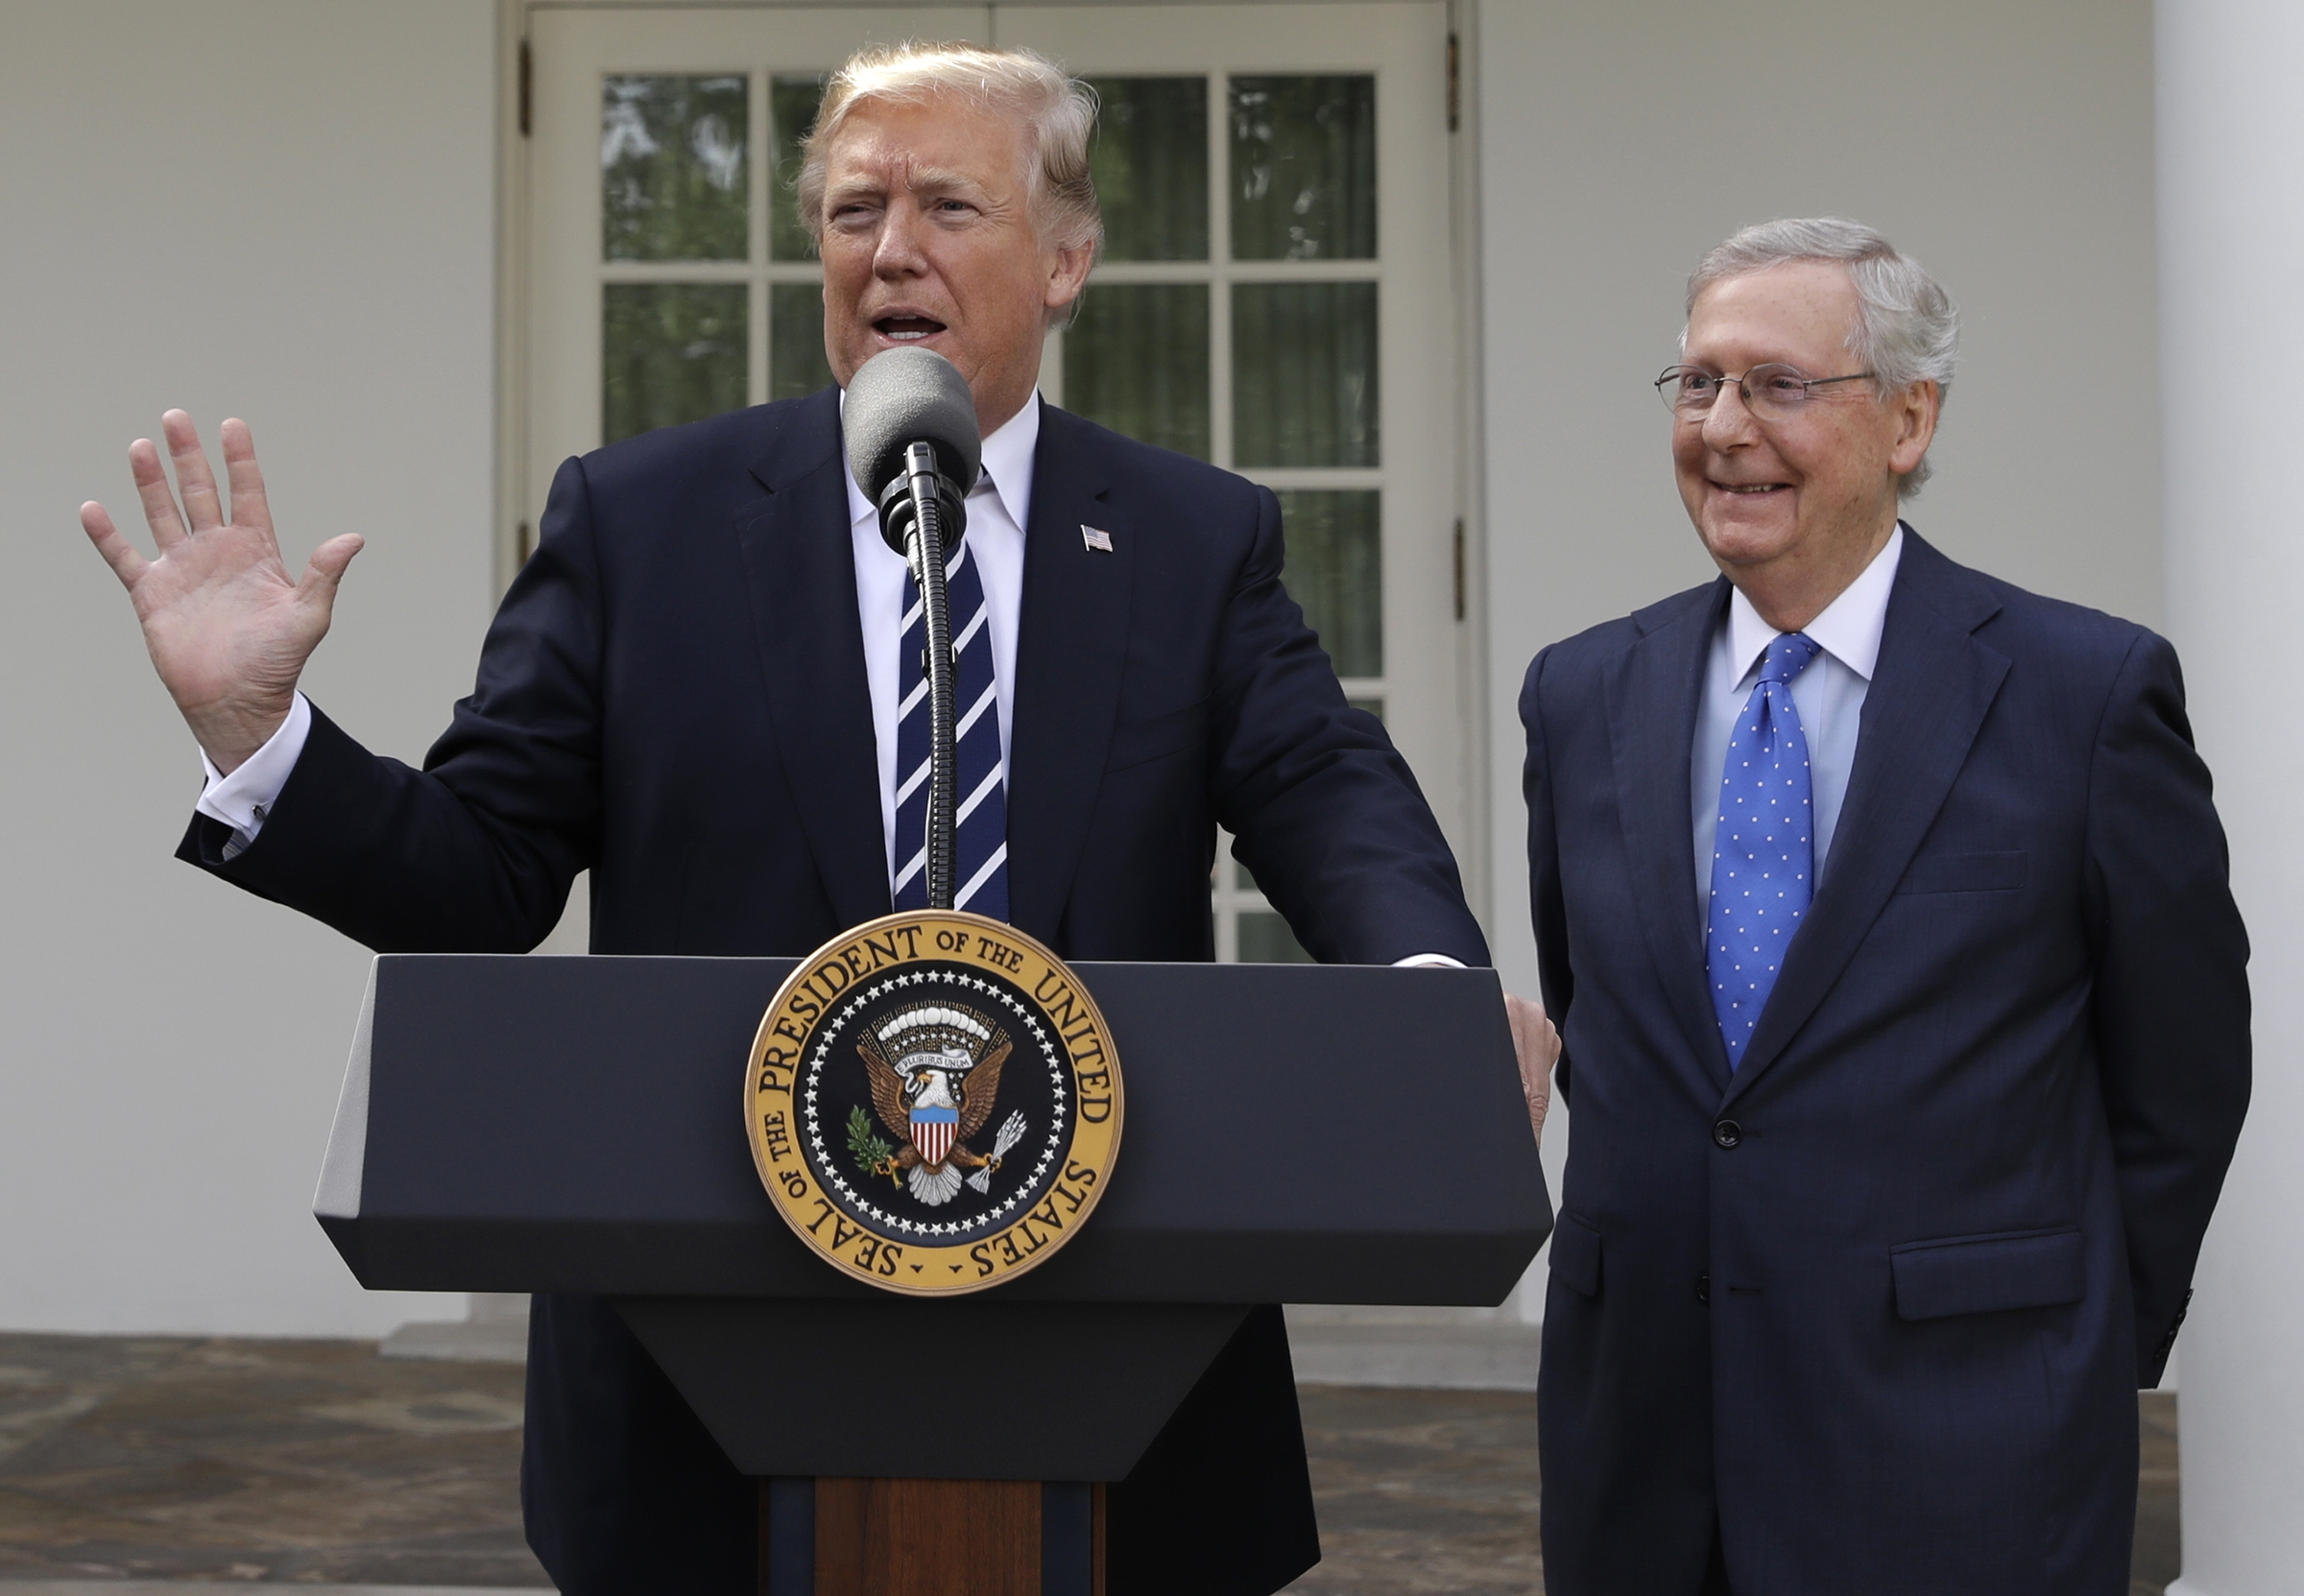 Trump rips McConnell at Palm Beach gathering